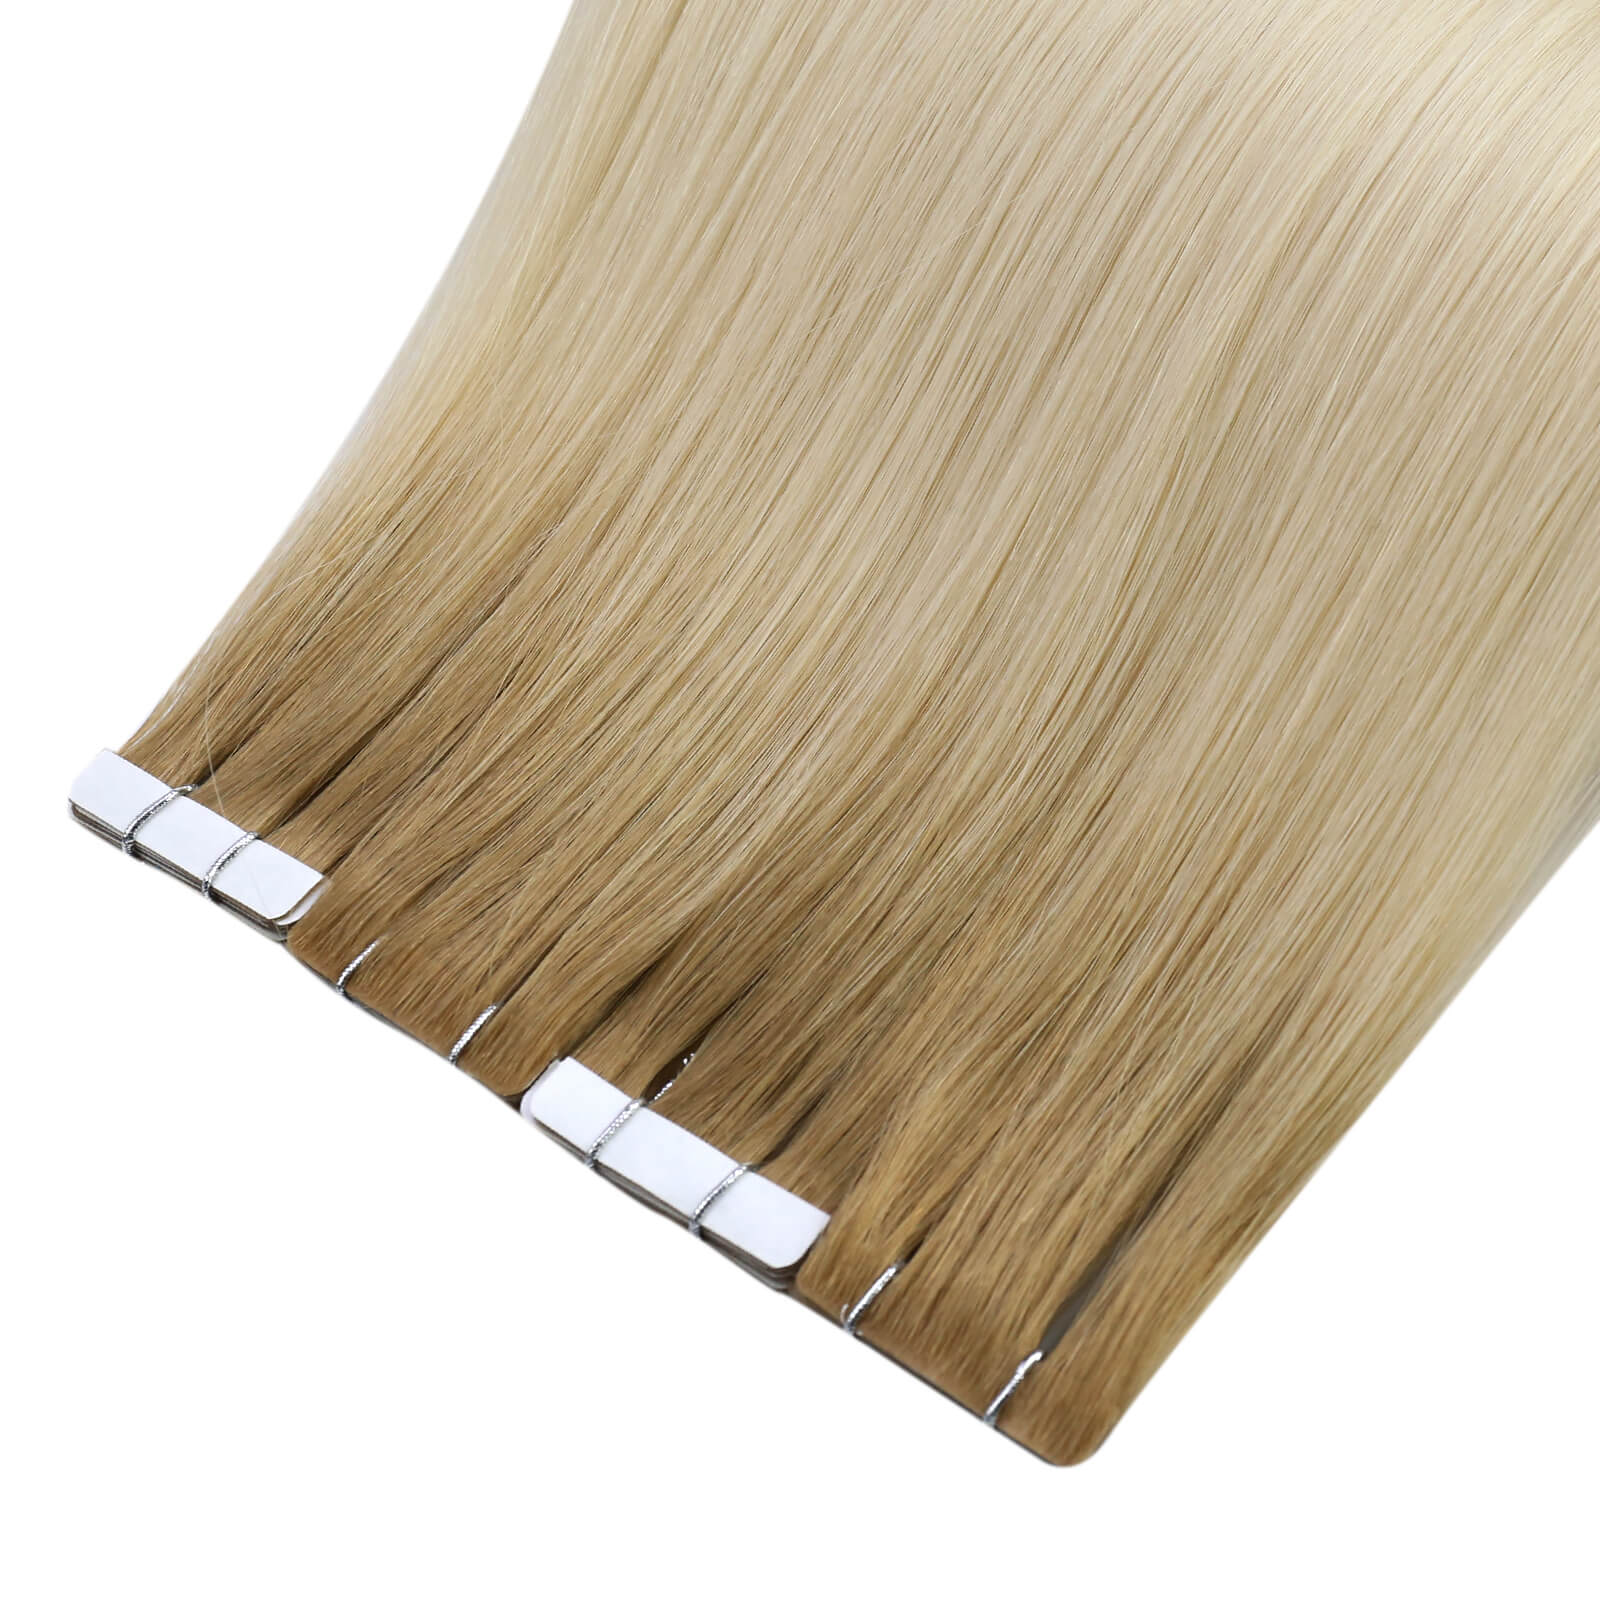 sunny hair extensions,tape in hair extensions human hair,best tape in hair extensions,blonde hair extensions,22 inch hair extensions,18 inch tape in hair extensions